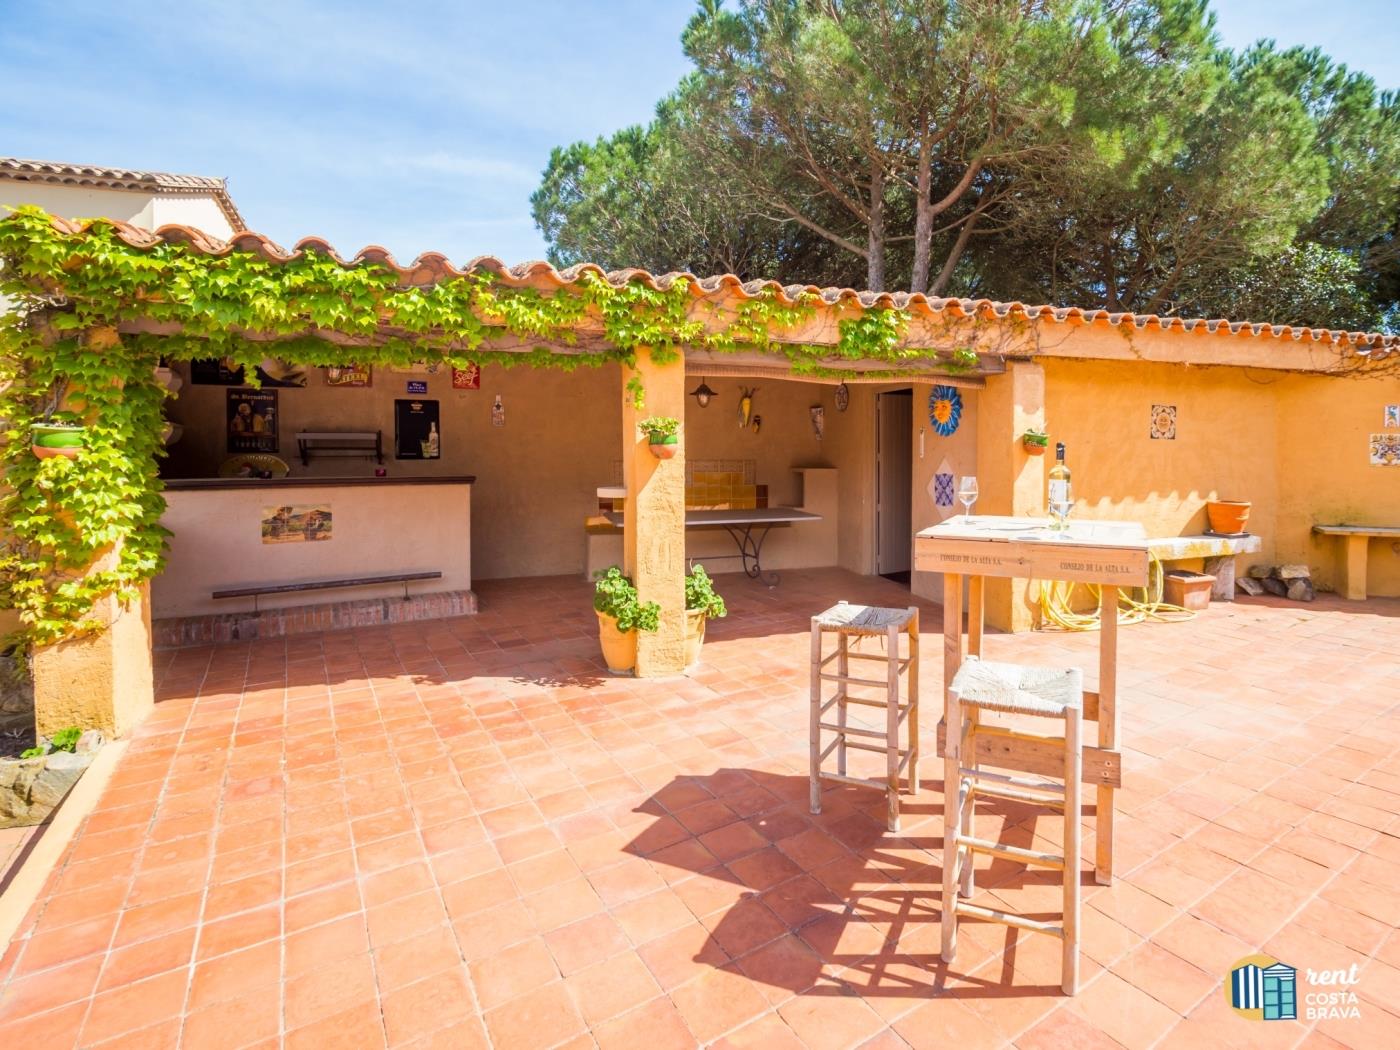 Villa Violeta spacious townhouse with private swimming pool. in Castell-Platja d'Aro